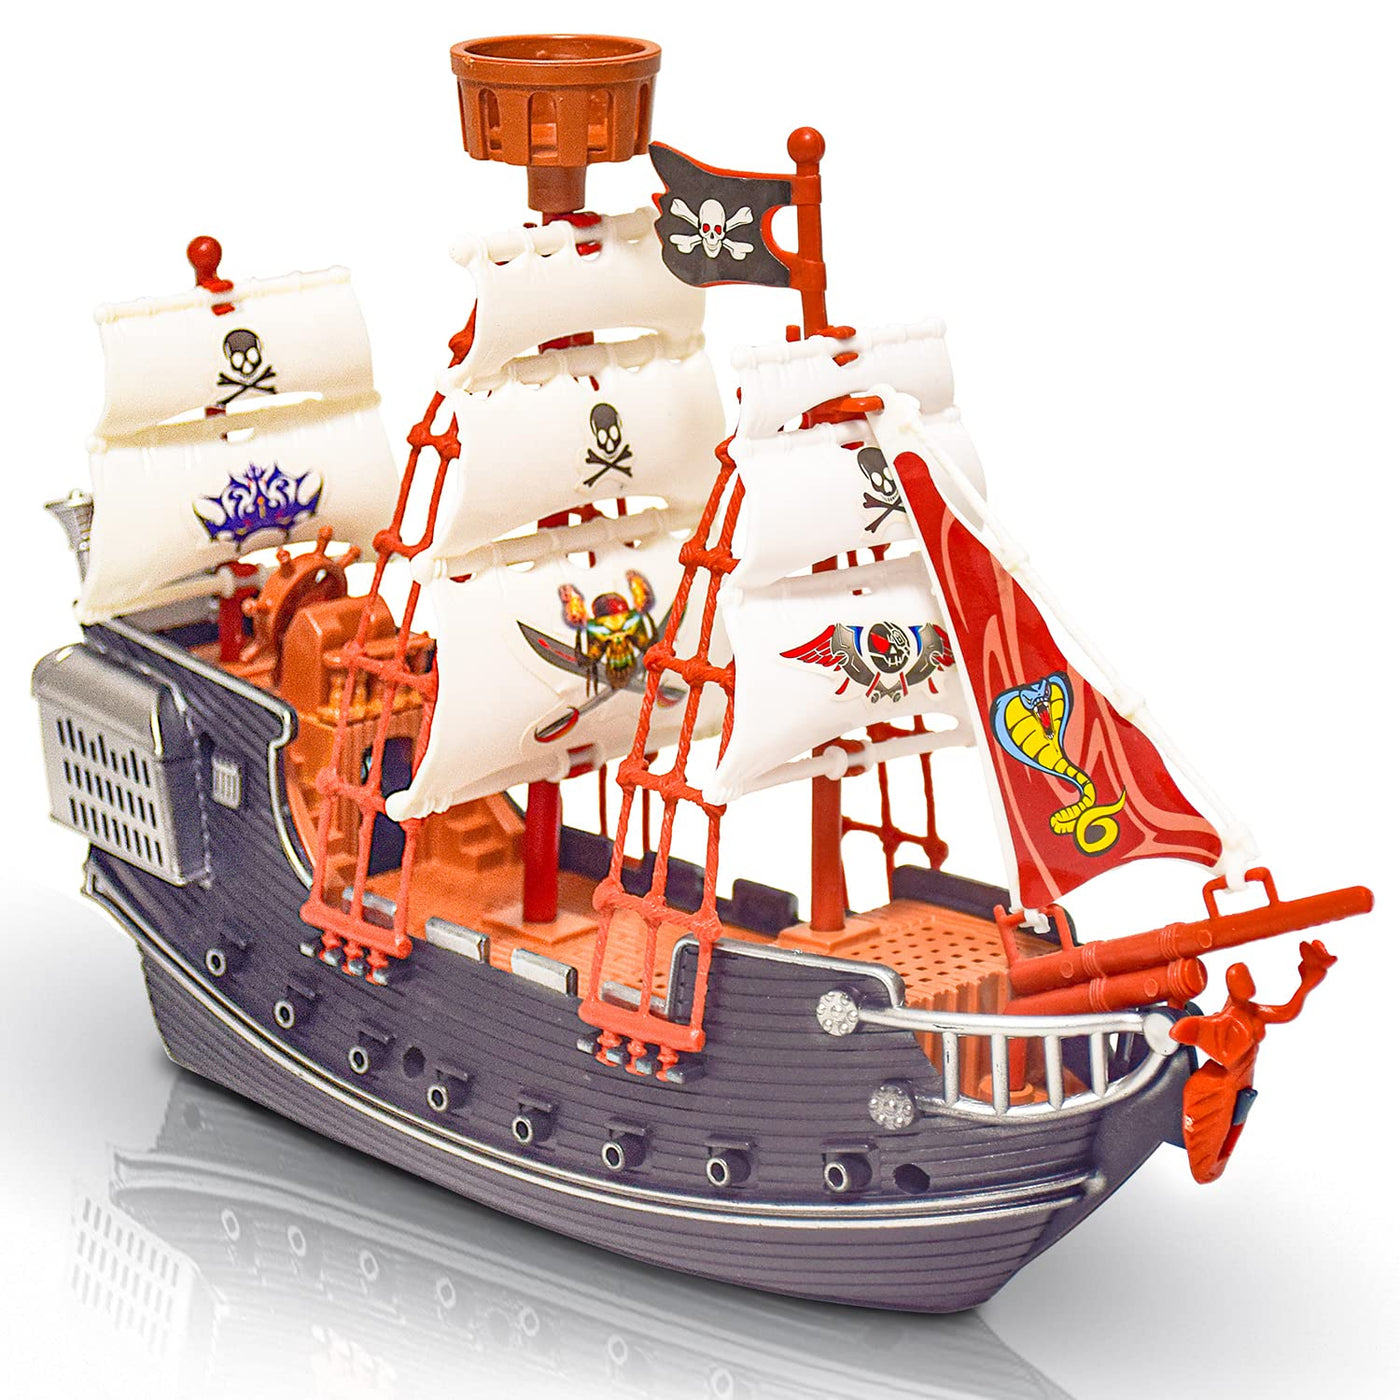 10 Inch Pirate Boat, Ship Playset with 2 Action Figures & Tree